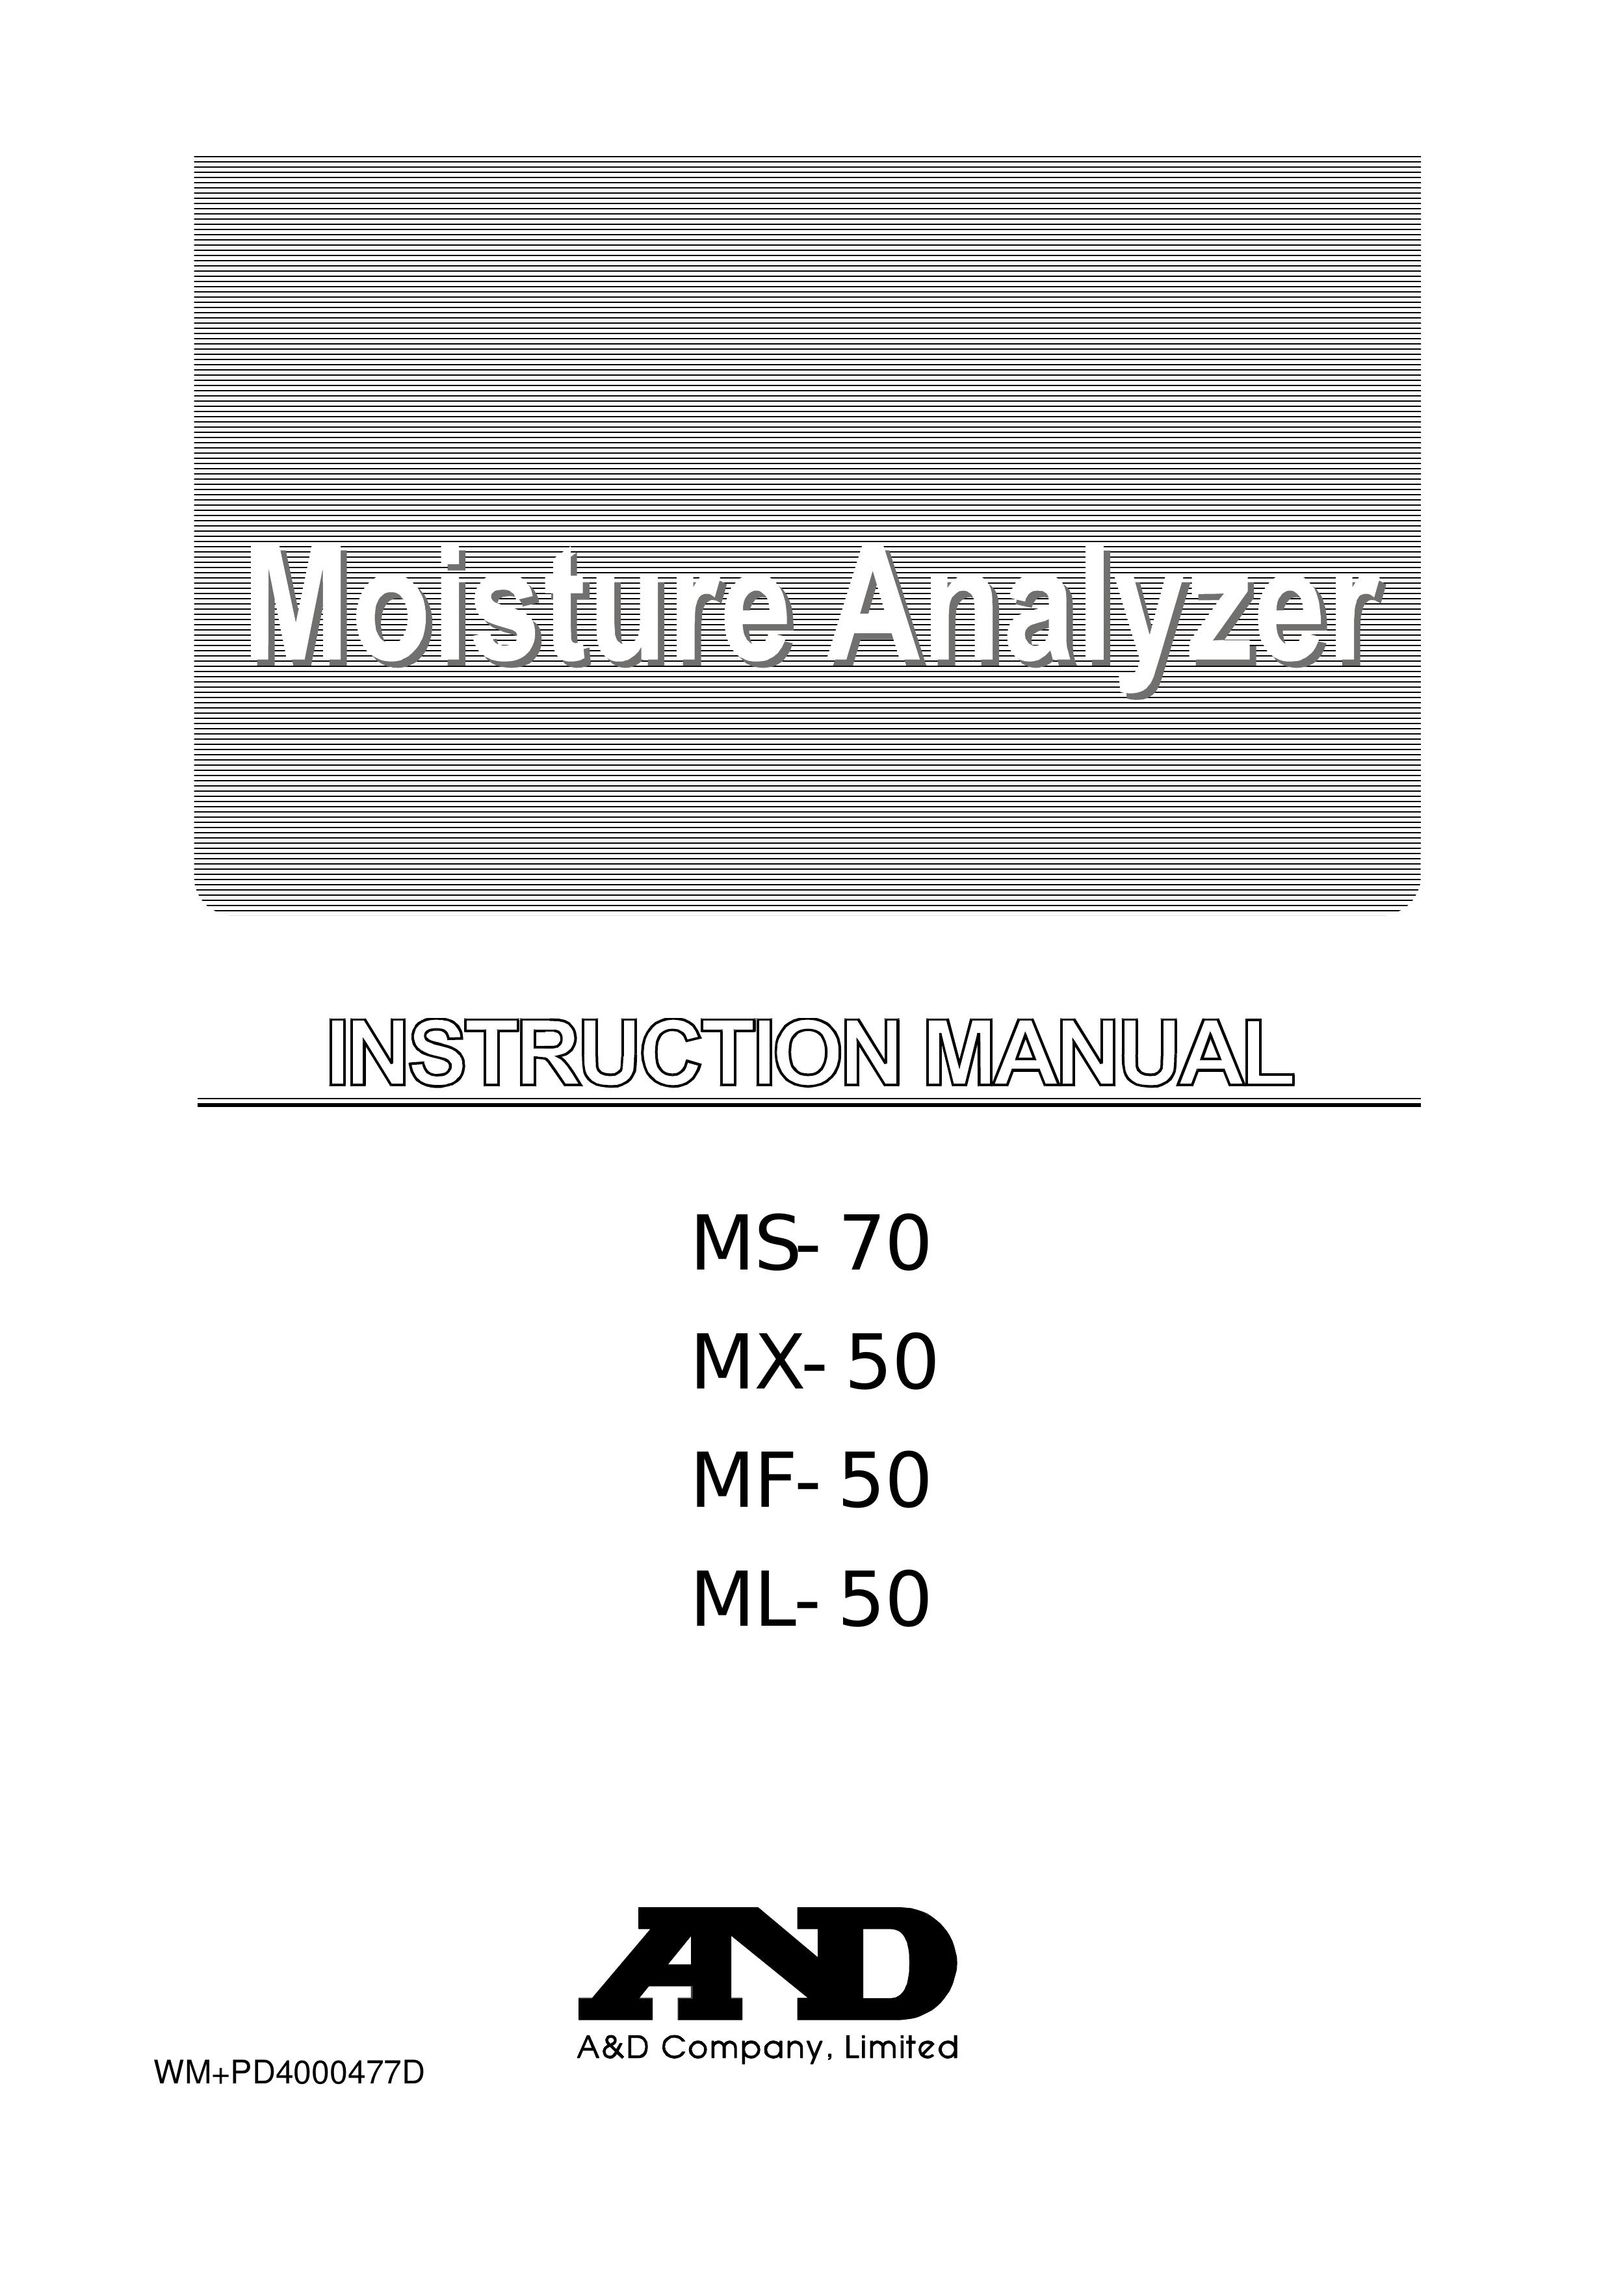 A&D MS-70 Thermostat User Manual